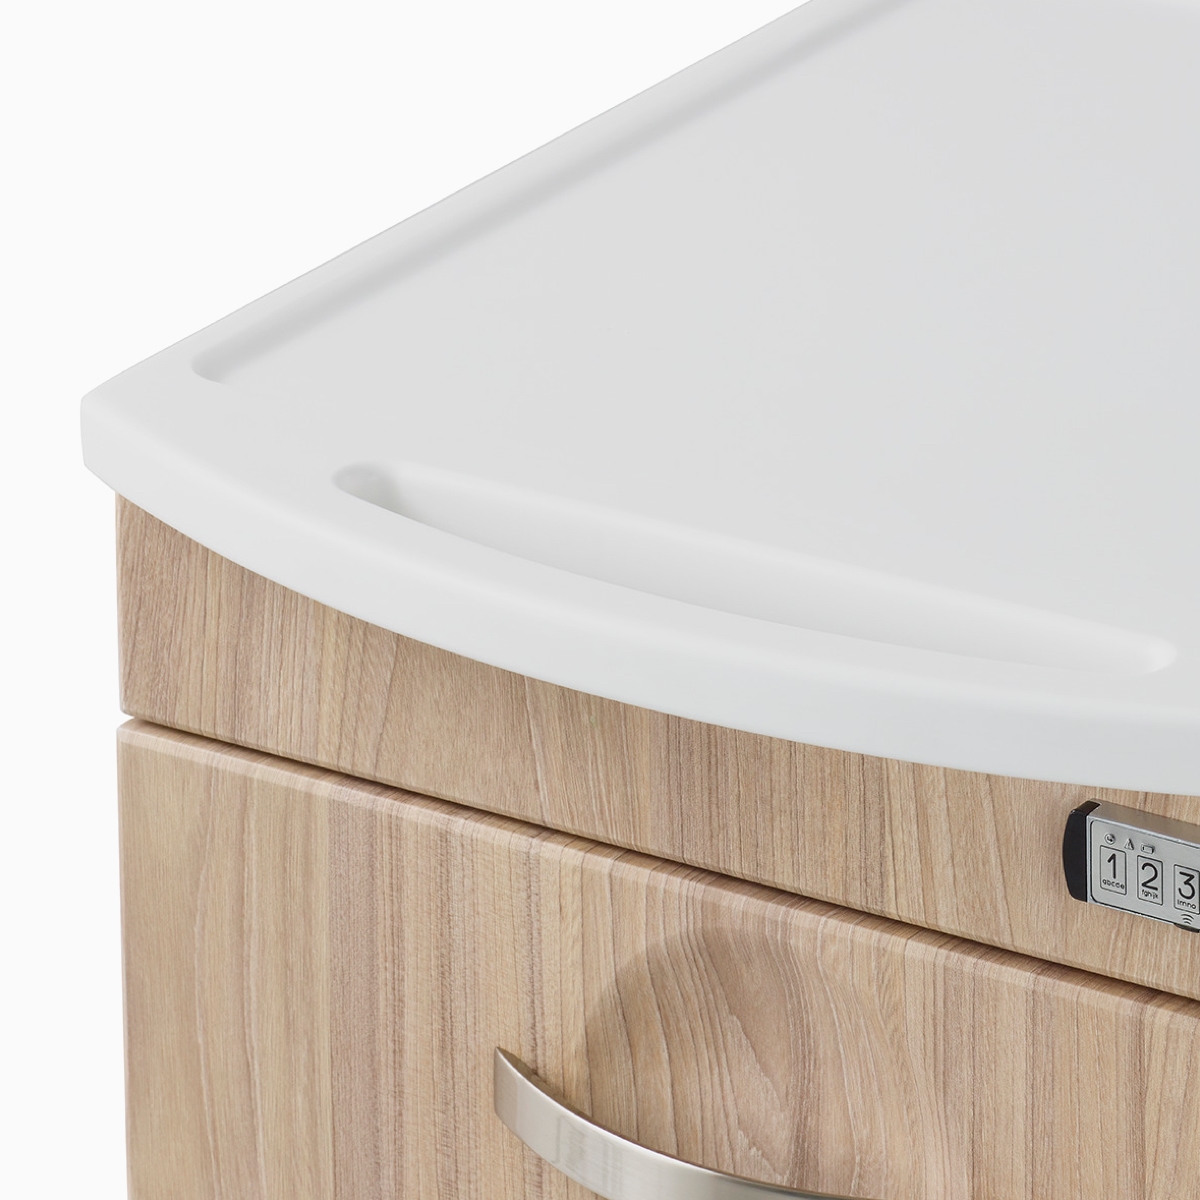 A close-up view of the solid surface, integrated top surface and pull of a Compass casework supply cart in a warm elm finish.